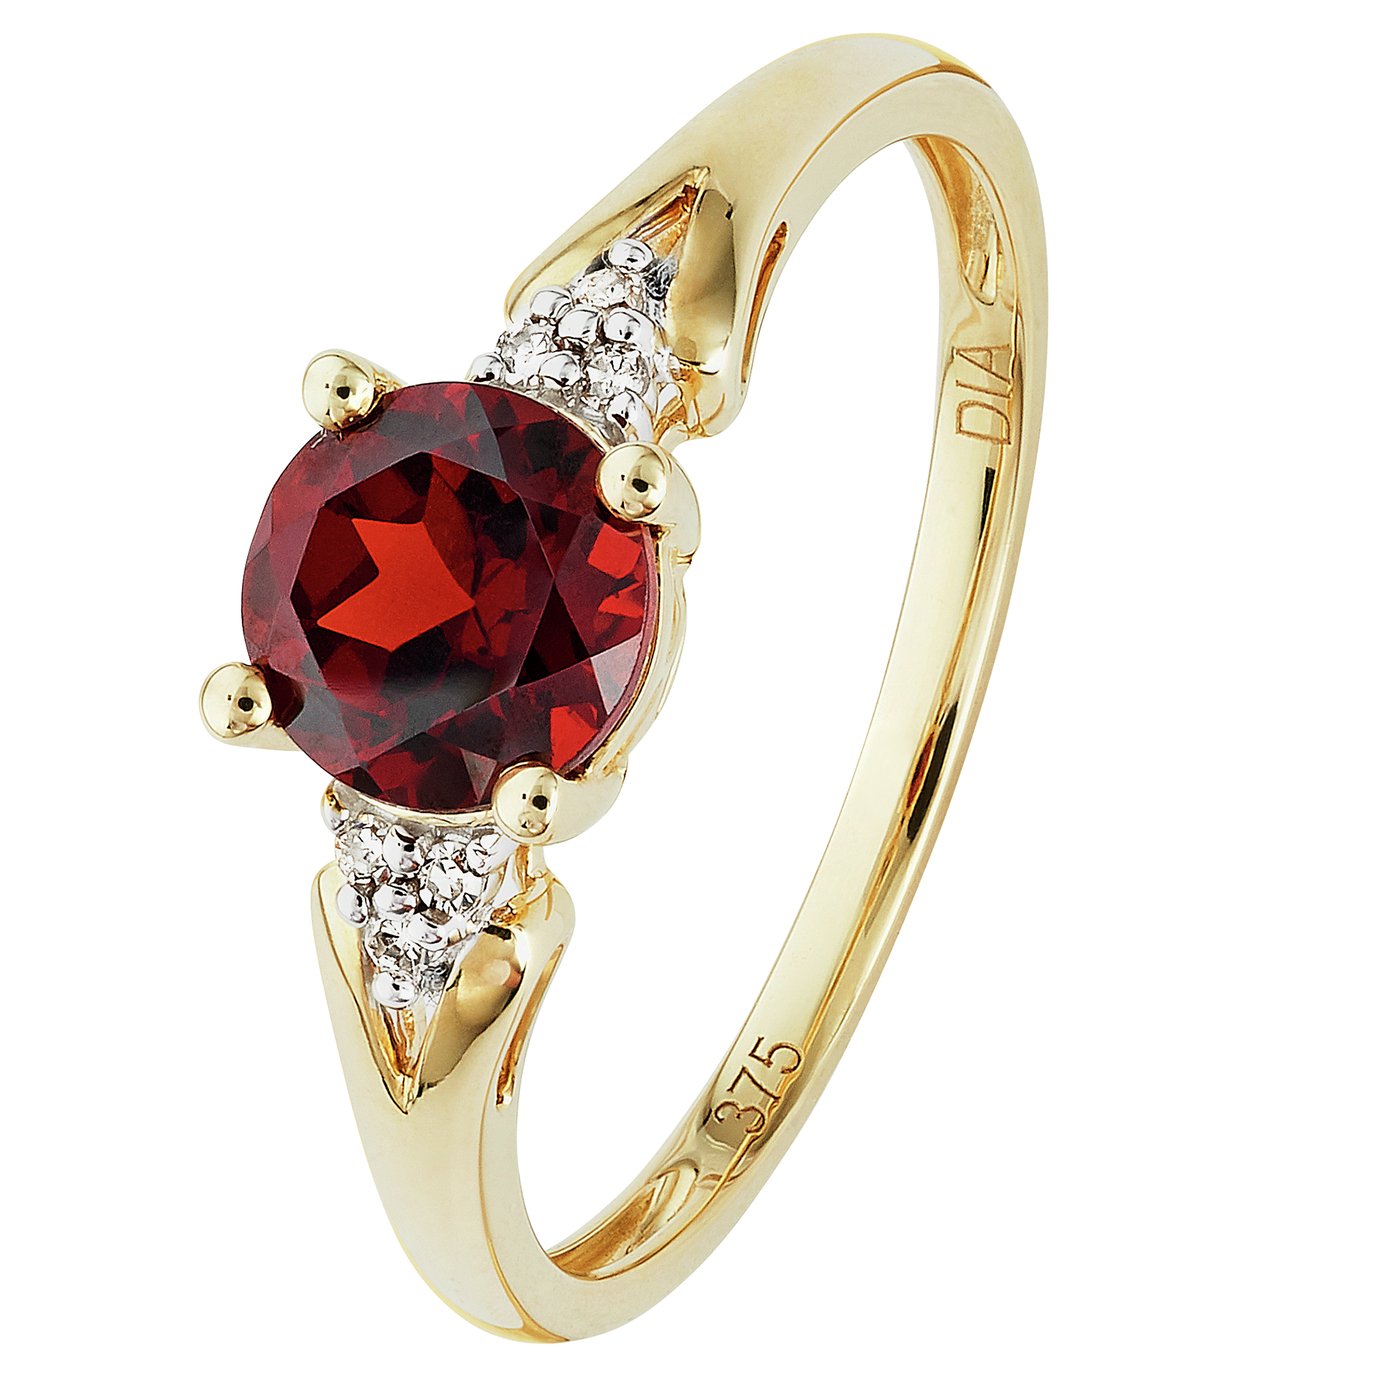 Revere 9ct Gold Garnet and Diamond Accent Ring - N